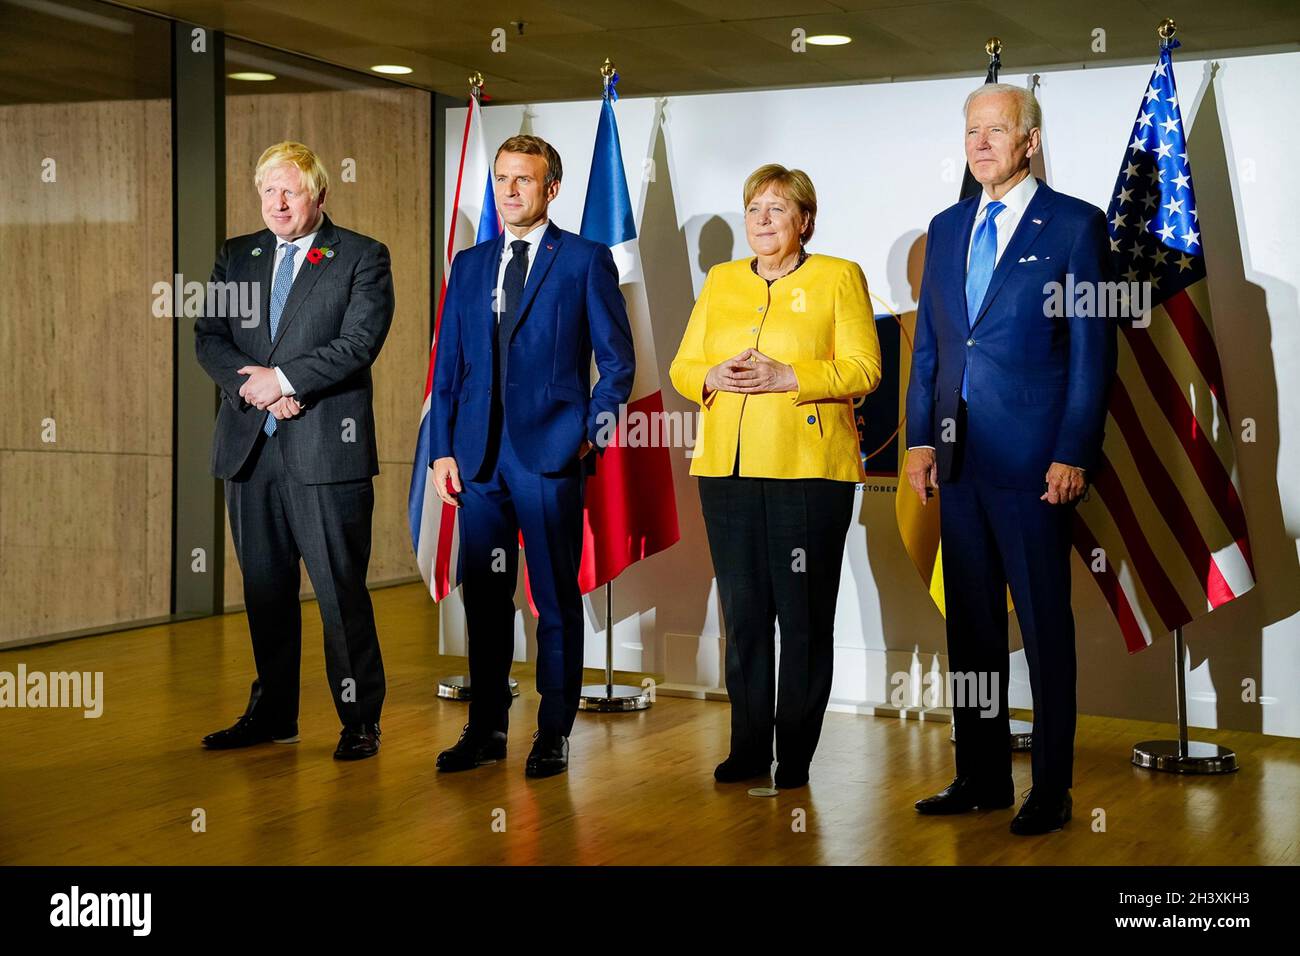 Rome, Italy. 30th Oct, 2021. U.S President Joe Biden holds a meeting with European allies to discuss Iranian nuclear talks on the sidelines of the G20 Summit October 30, 2021 in Rome, Italy. Standing from left to right are: British Prime Minister Boris Johnson, French President Emmanuel Macron, German Chancellor Angela Merkel and U.S. President Joe Biden. Credit: Adam Schultz/White House Photo/Alamy Live News Stock Photo